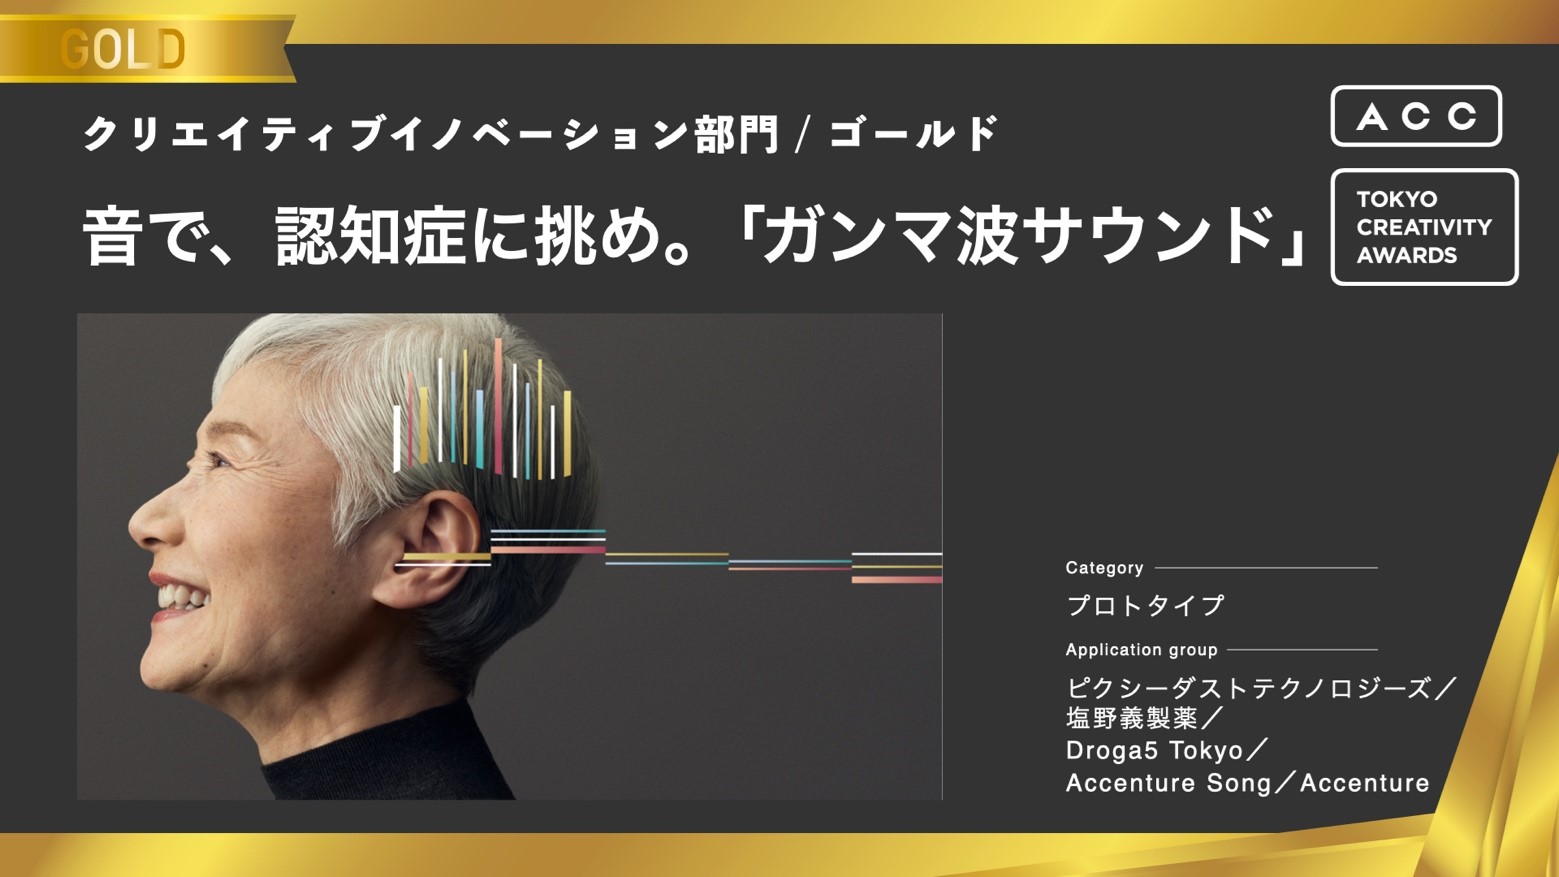 “Gamma Wave Sound” jointly developed by Pixie Dust Technologies, Inc. and Shionogi & Co., Ltd. won the ACC TOKYO CREATIVITY AWARDS for Creative Innovation Gold and ICC Summit Award